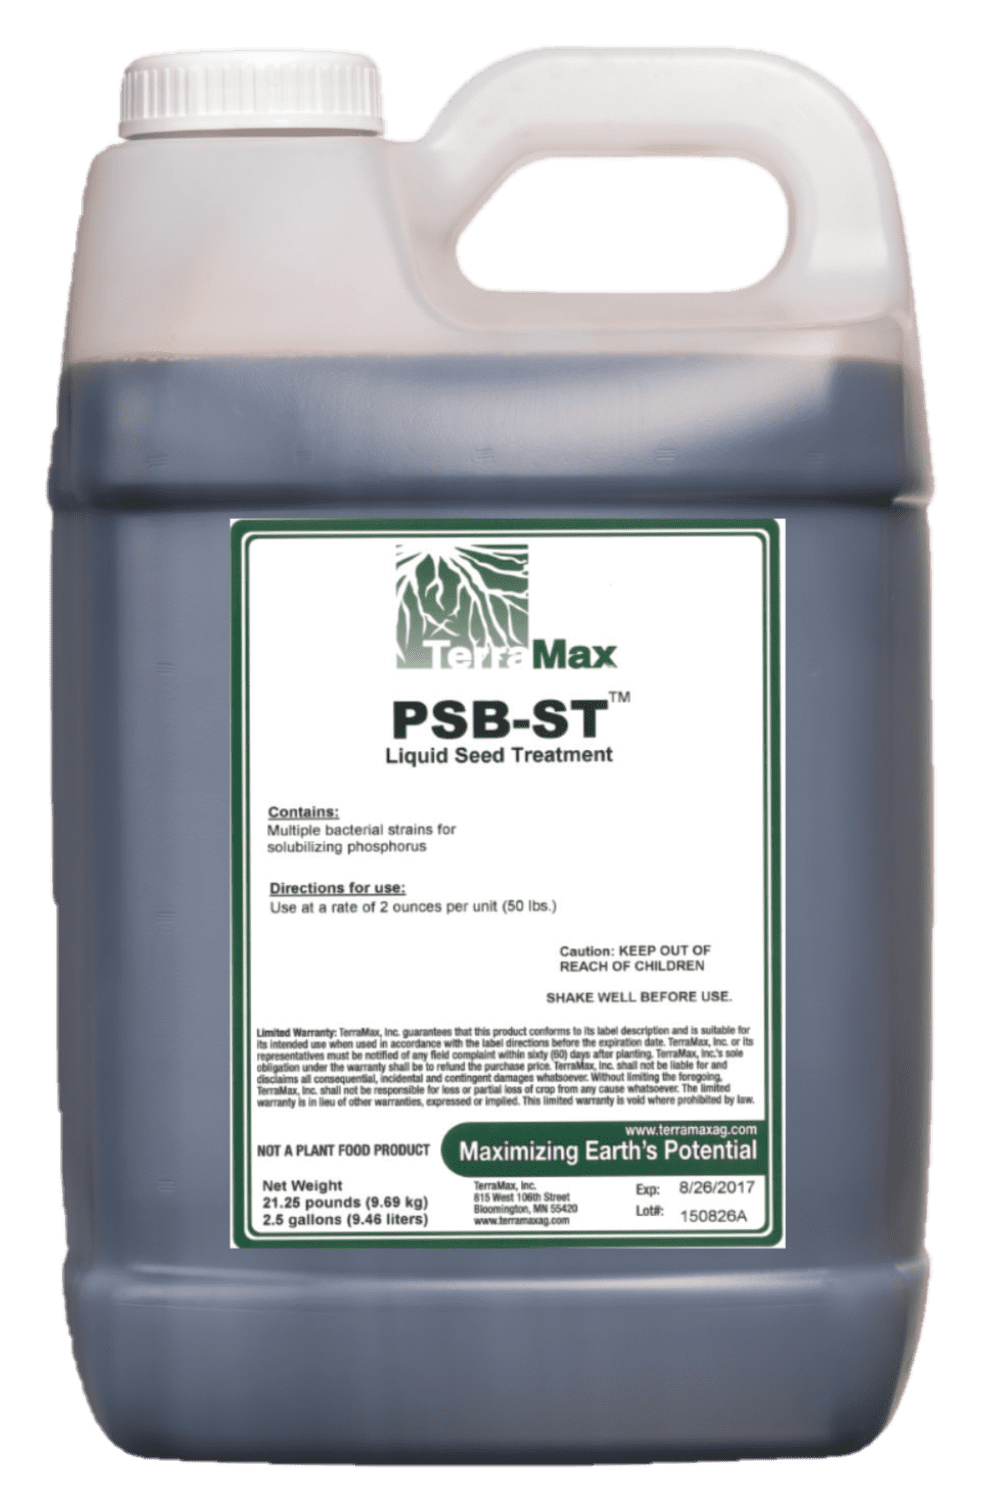 PSB-ST microbial inoculant.